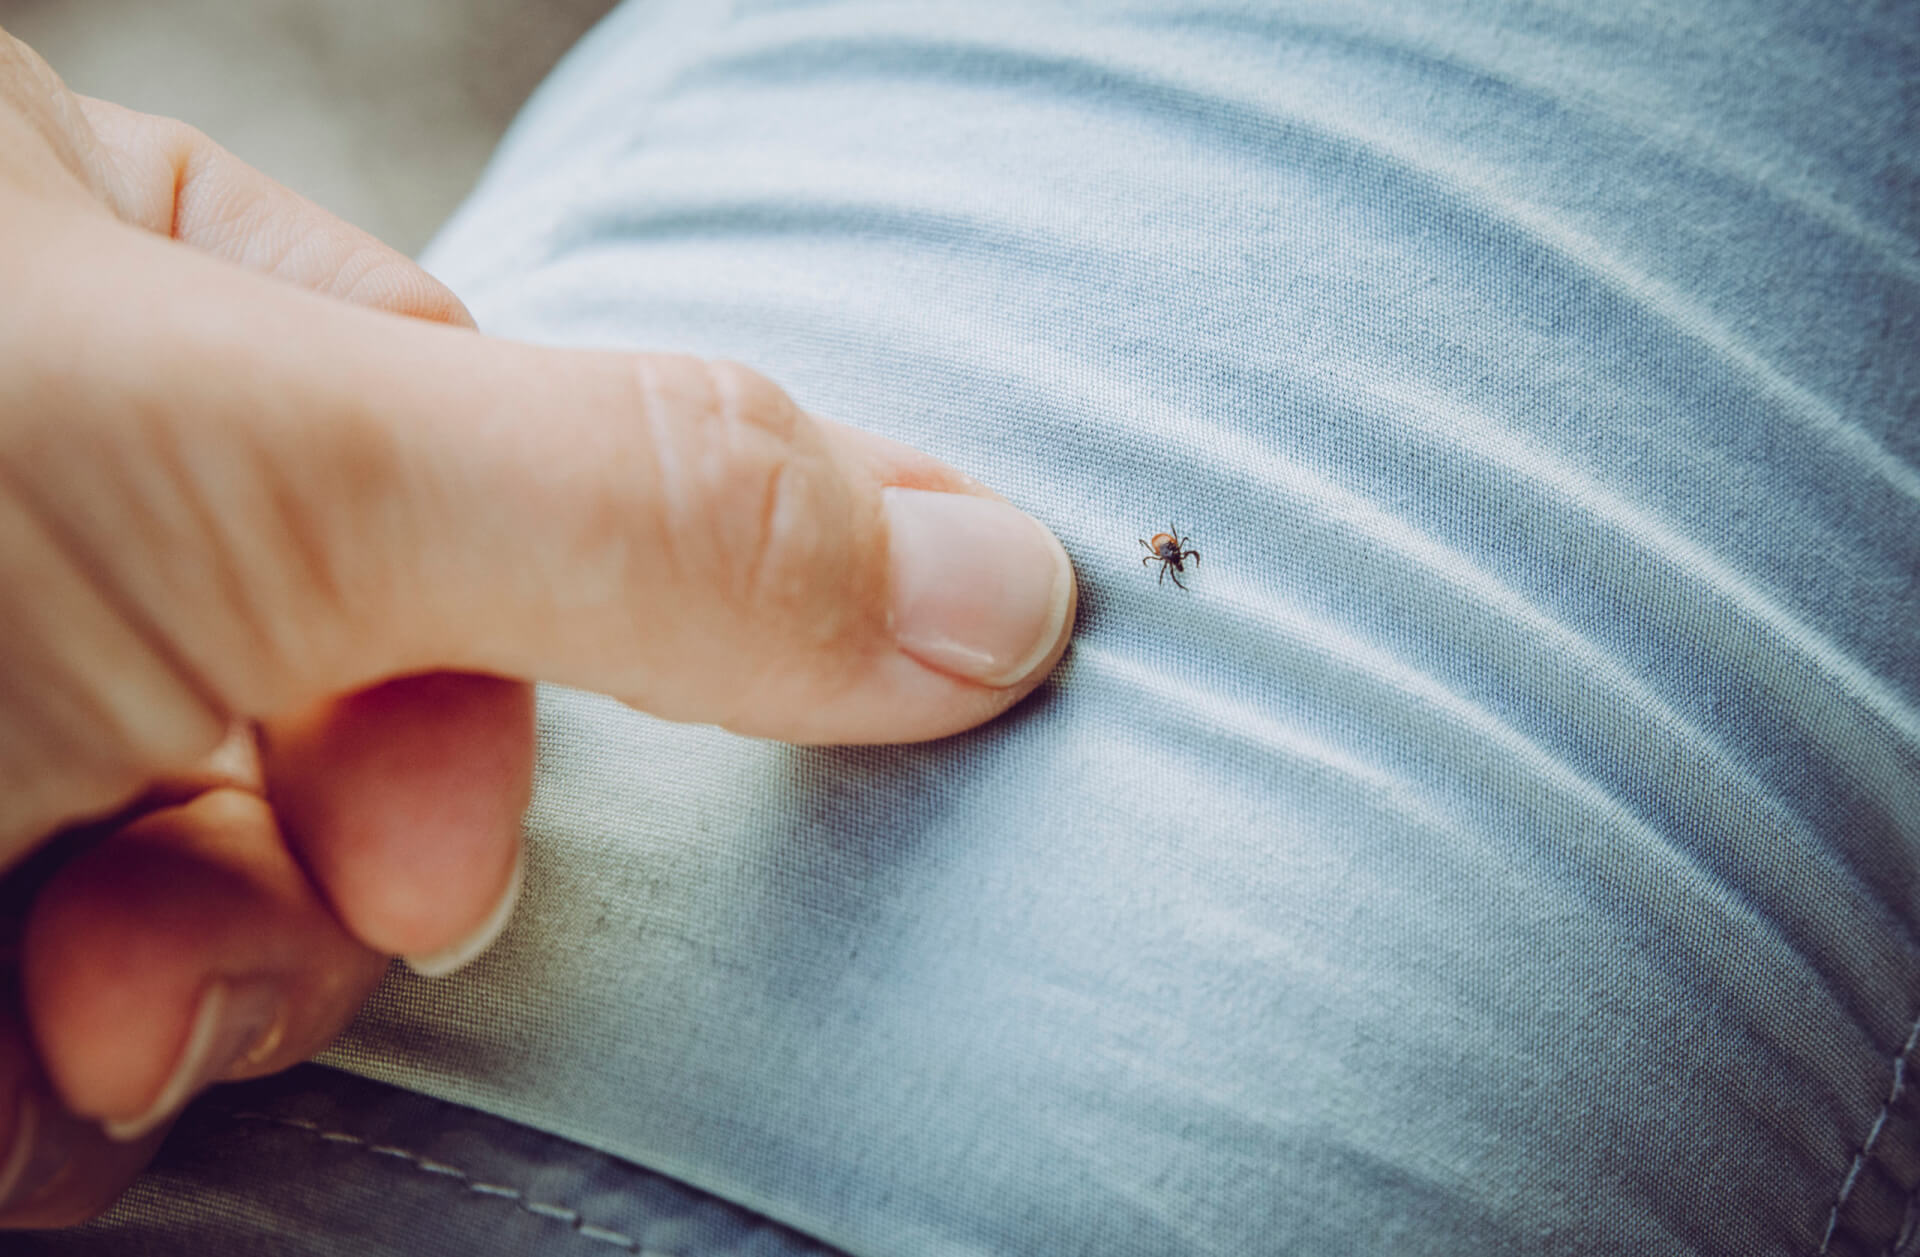 image of tick on someone's pants